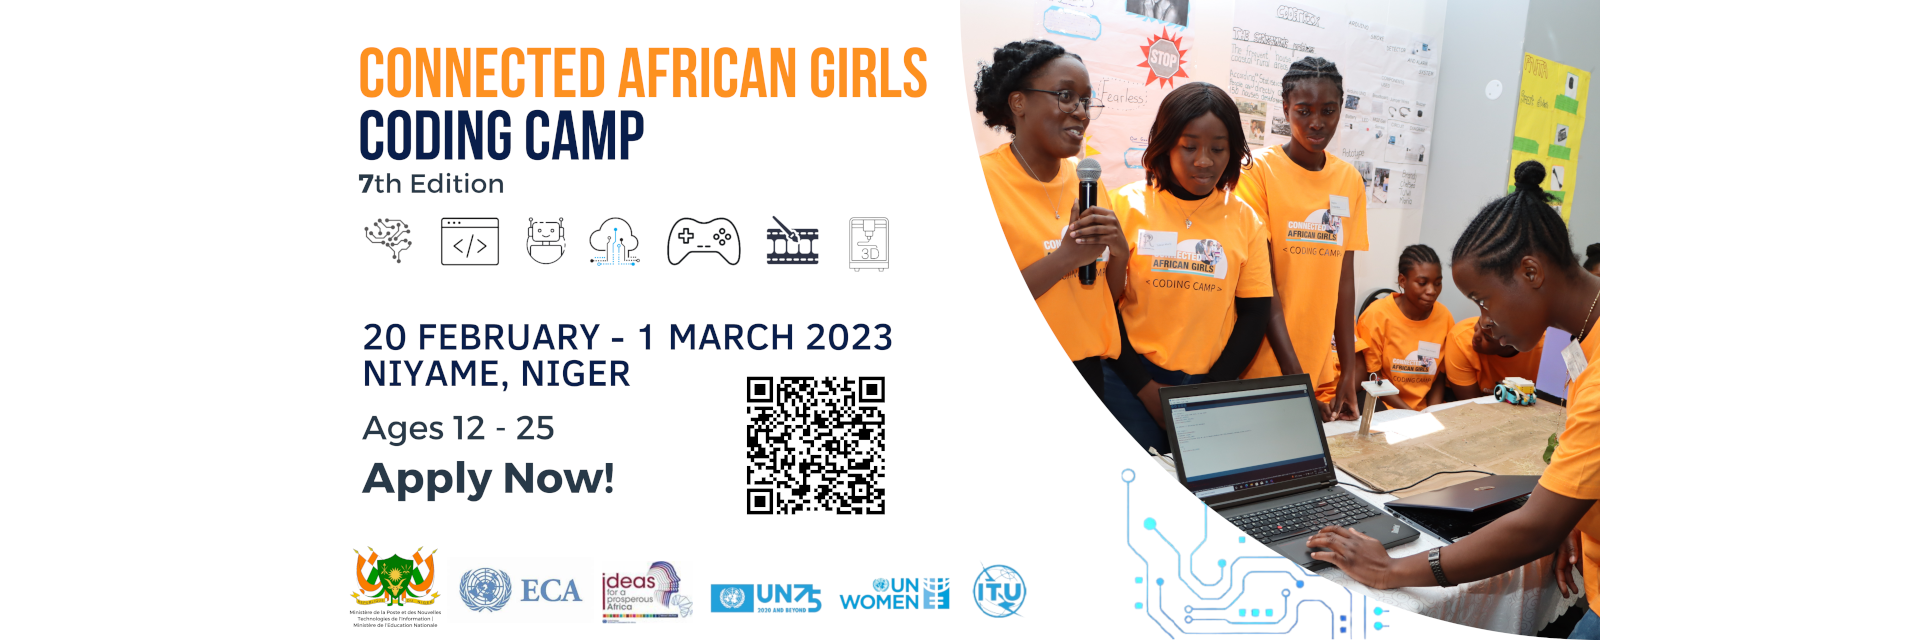 All set for the 7th Connected African Girls Coding Camp in Niamey